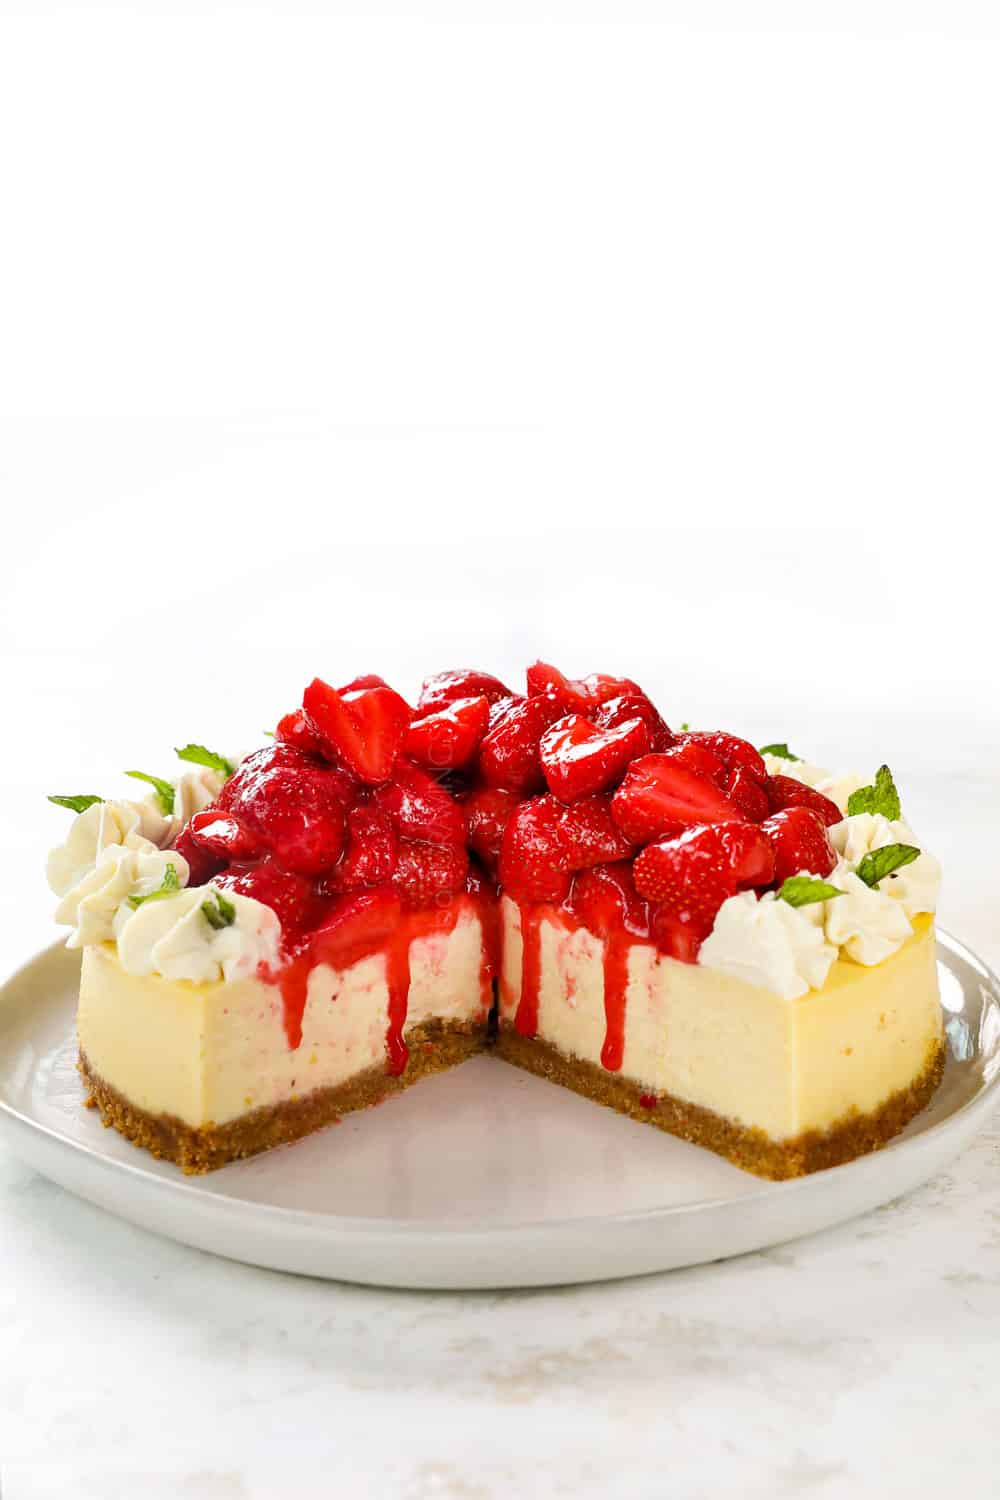 front view of strawberry cheesecake with slices missing showing the strawberry topping and rich cheesecake